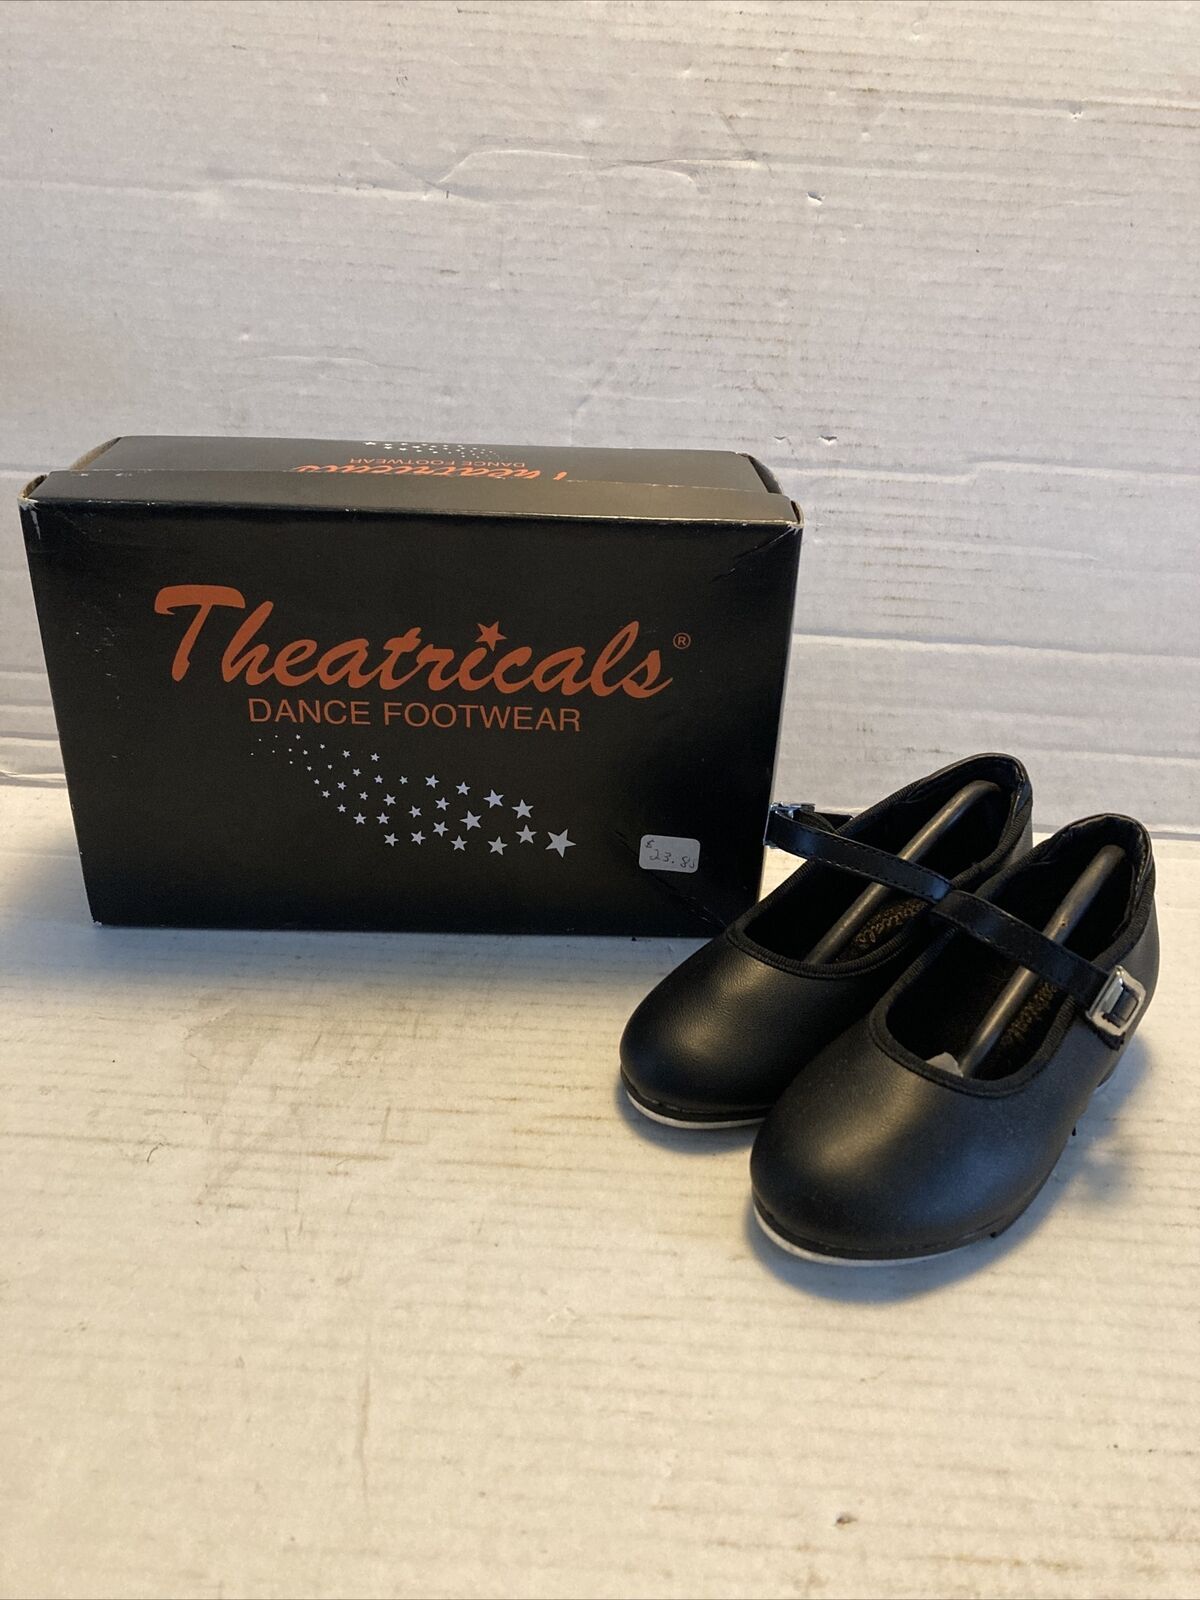 Theatricals Toddlers Black 9200c Tap Shoes Strap Closure Size 7m Toddler